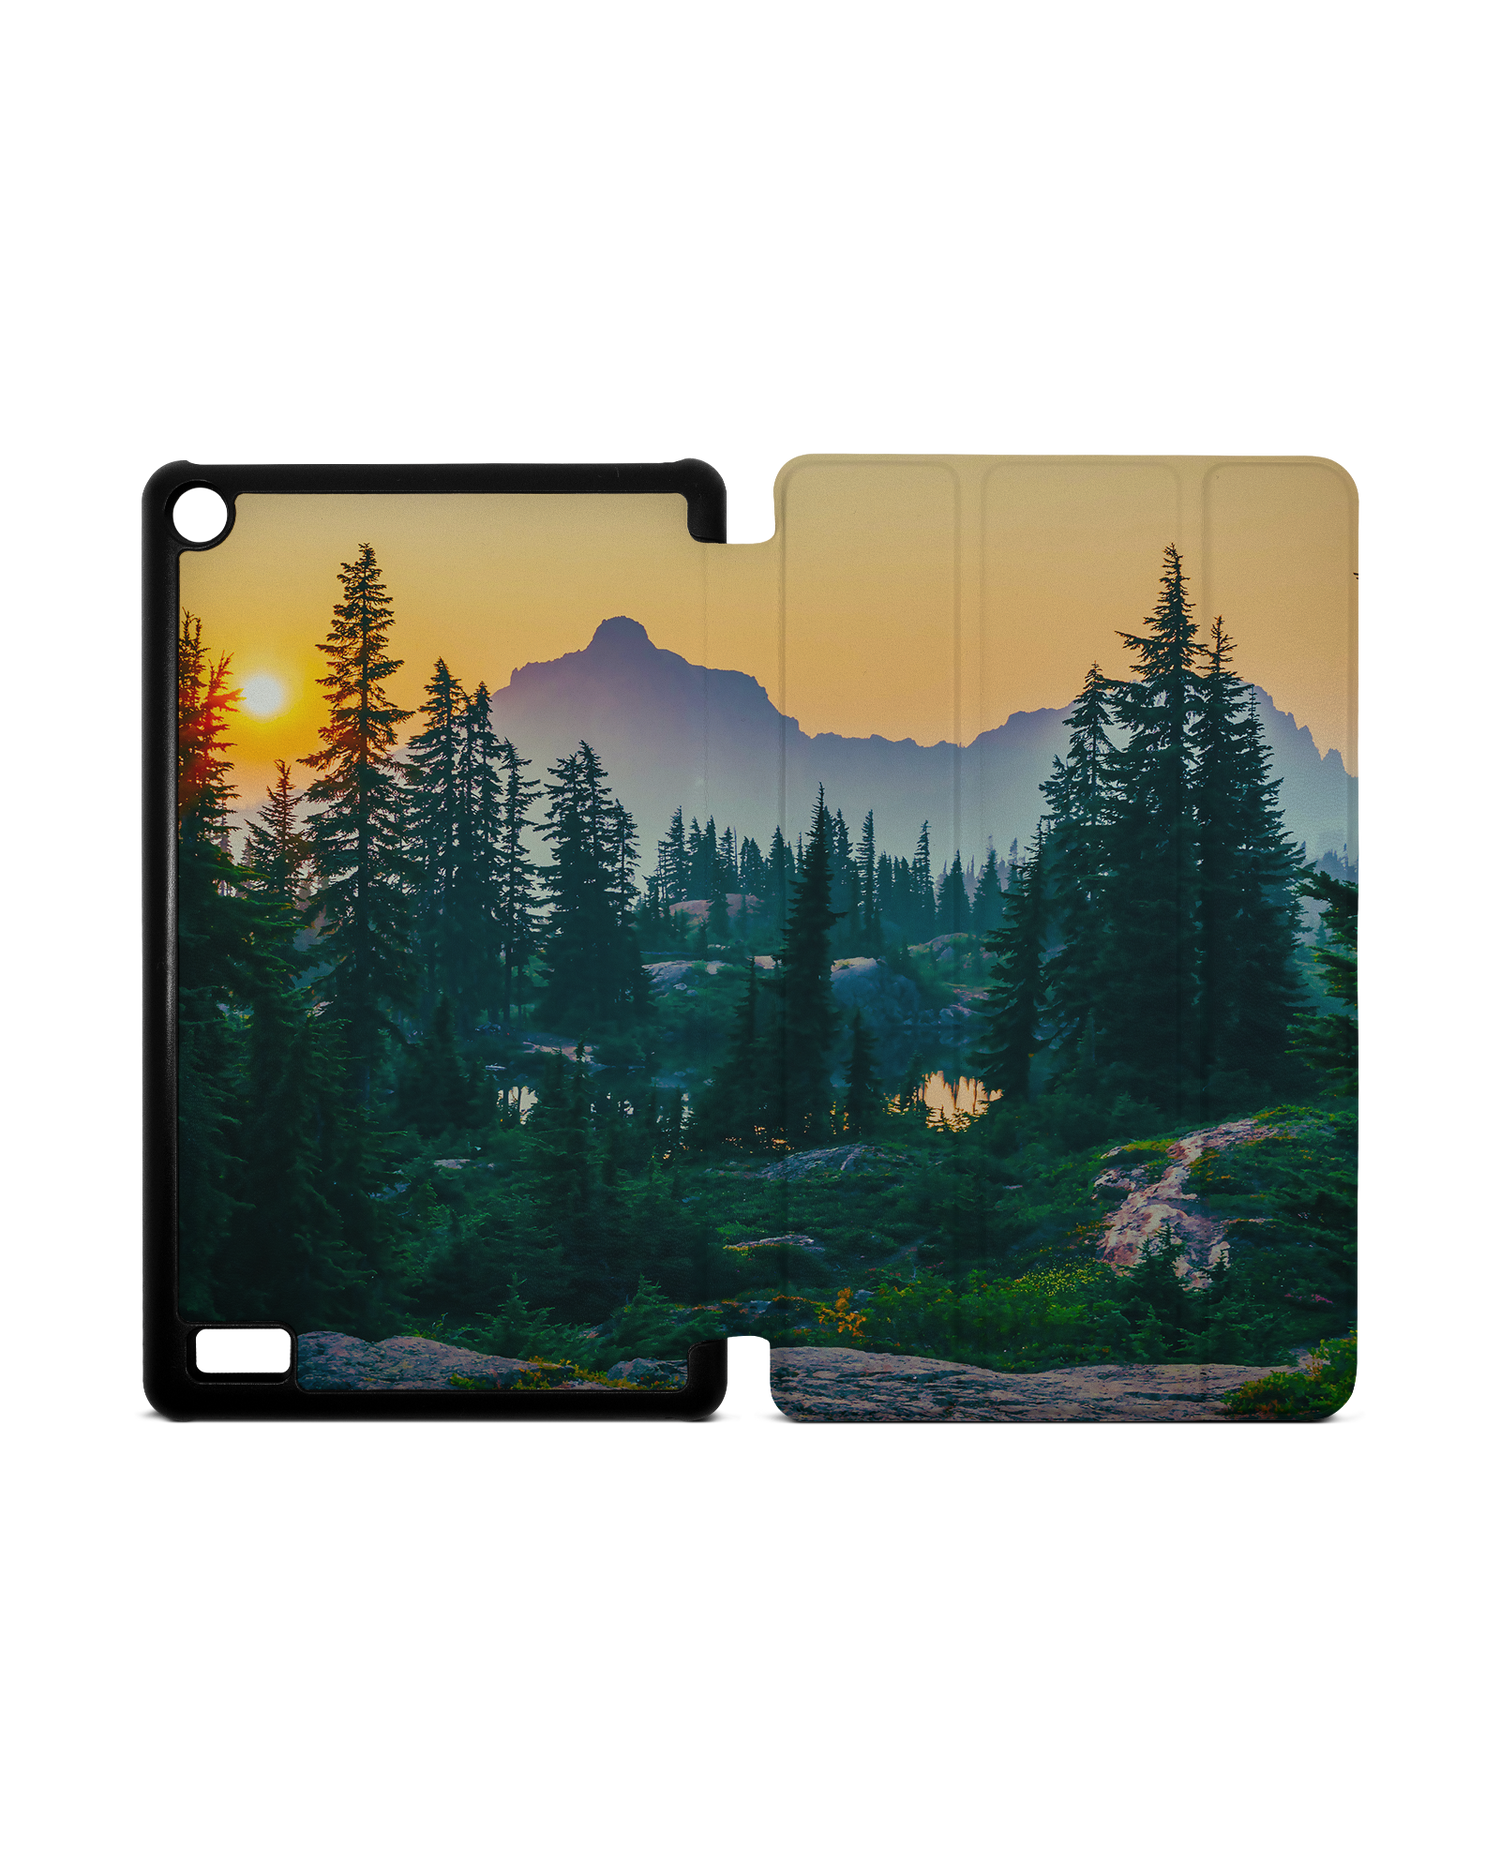 Forest Tablet Smart Case for Amazon Fire 7: Opened